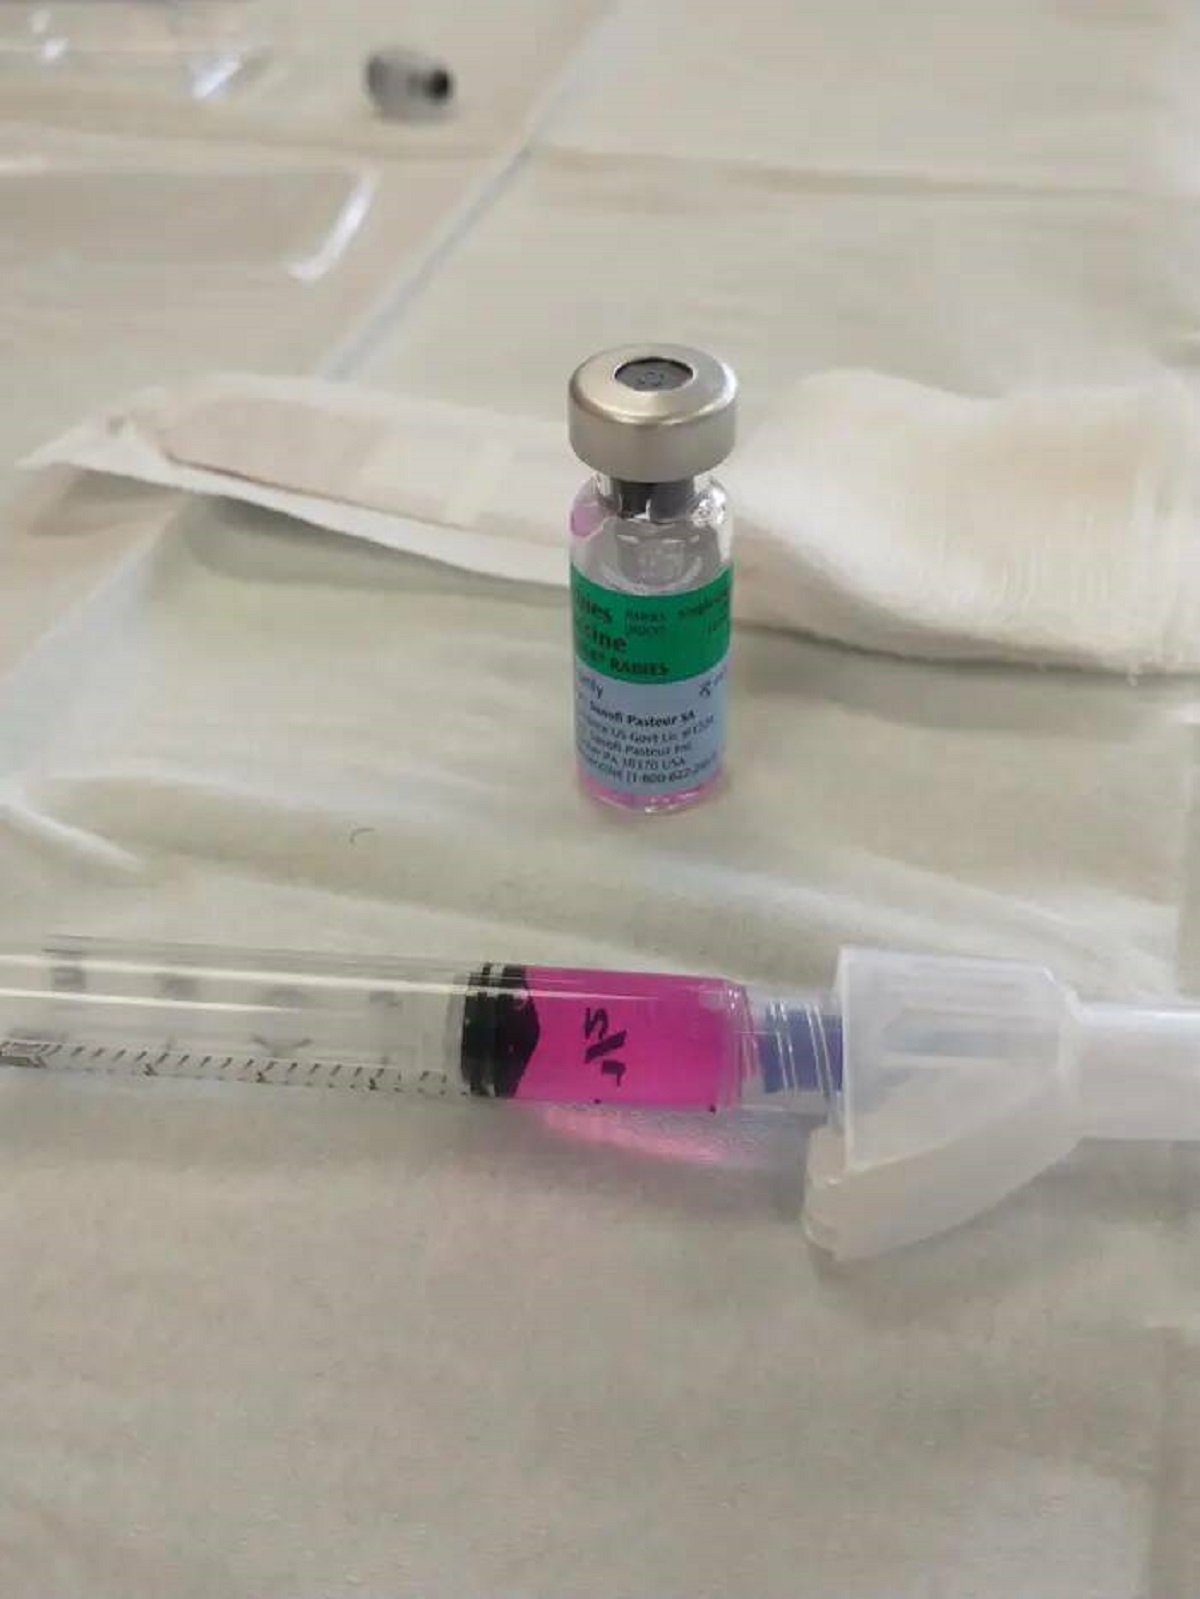 This is what the rabies vaccine looks like. It's purple!